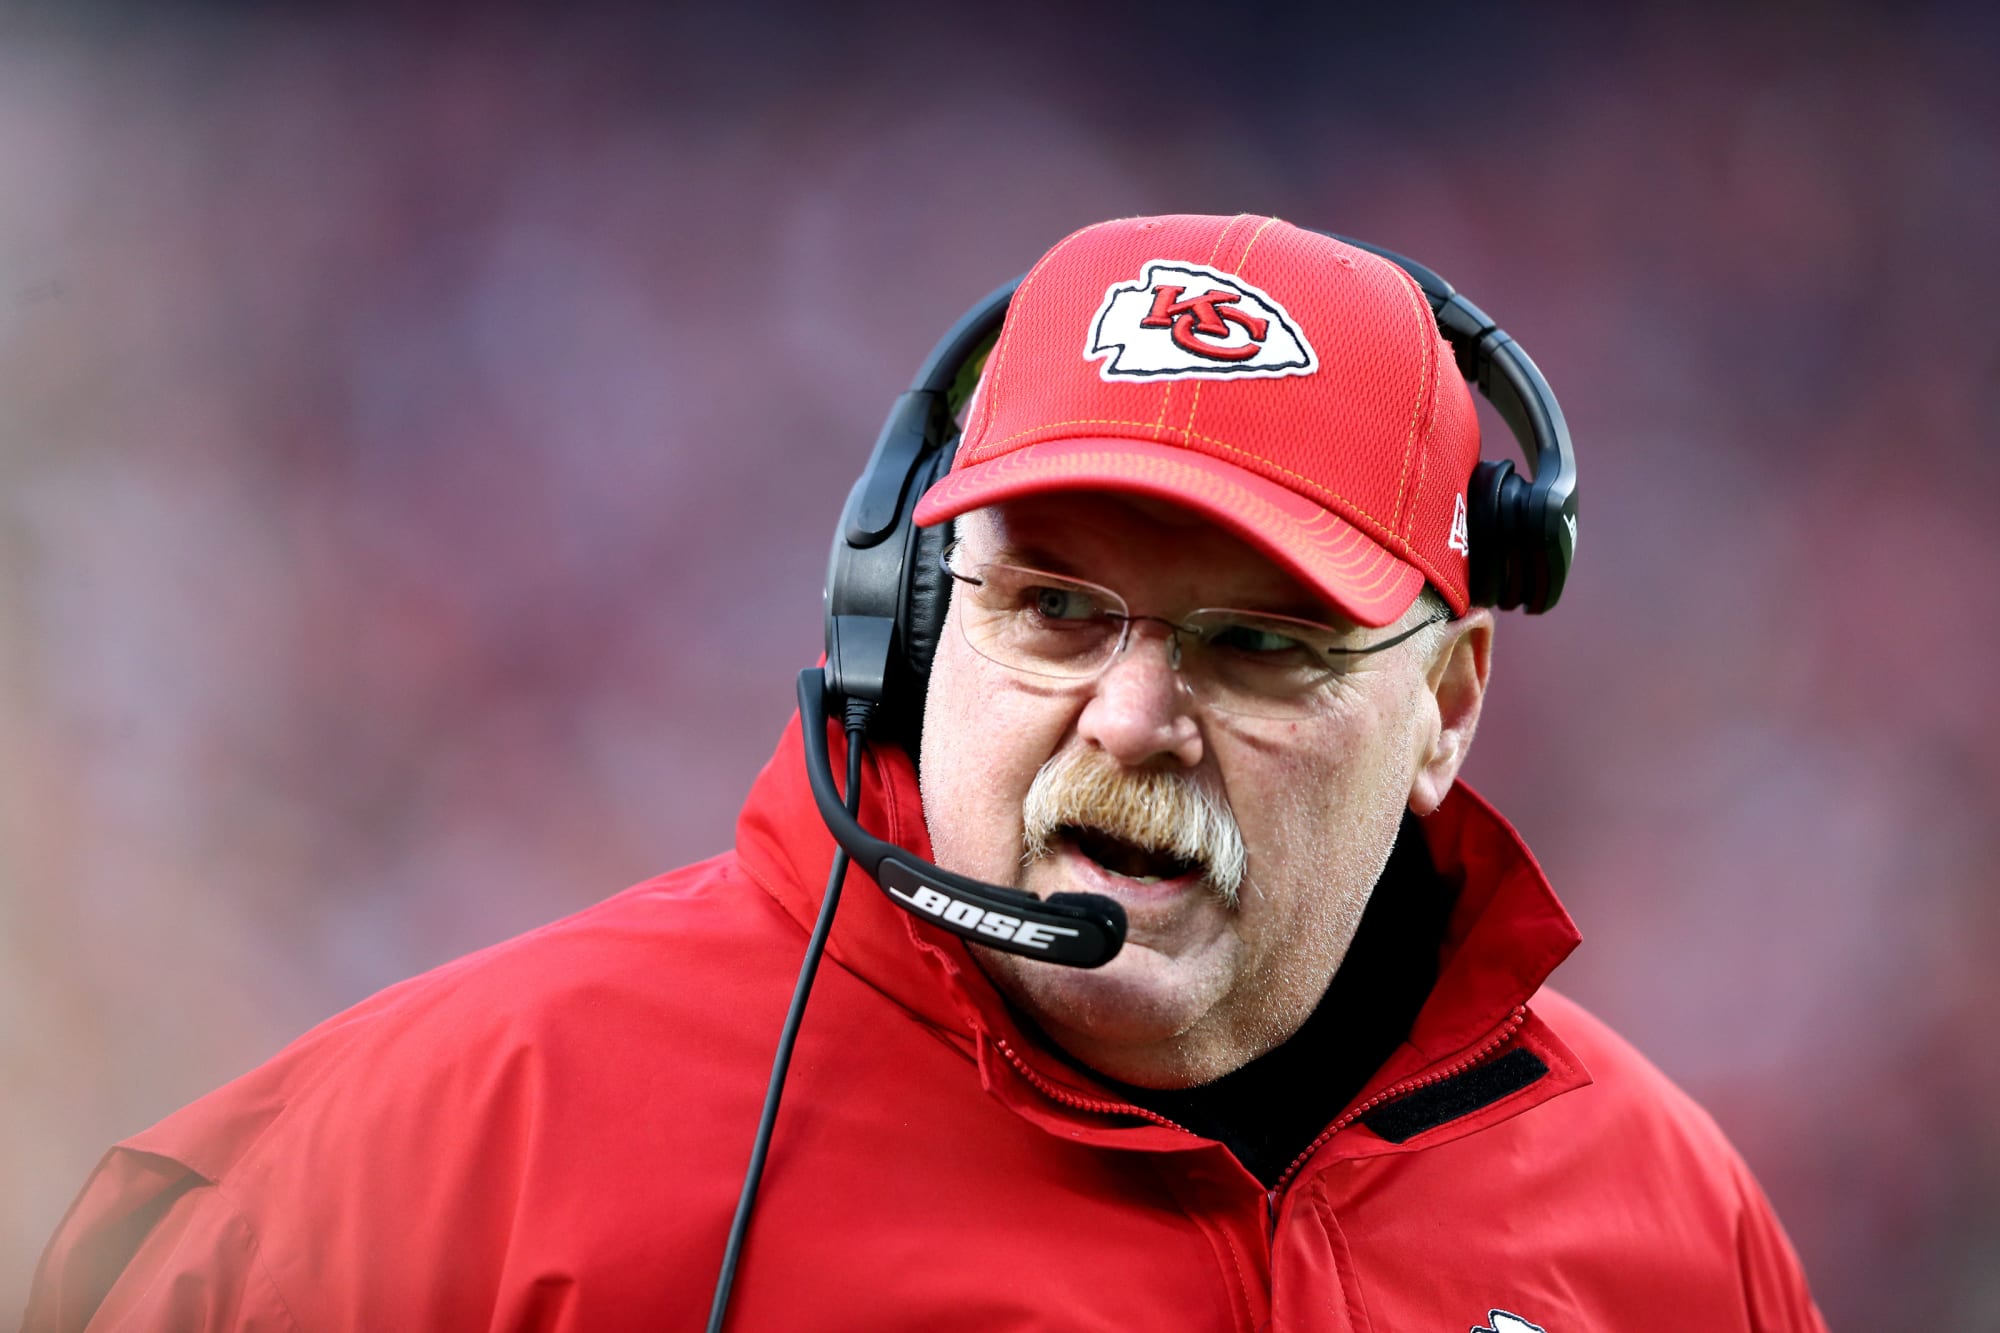 Chiefs head coach Andy Reid fully supports Black Lives Matter movement